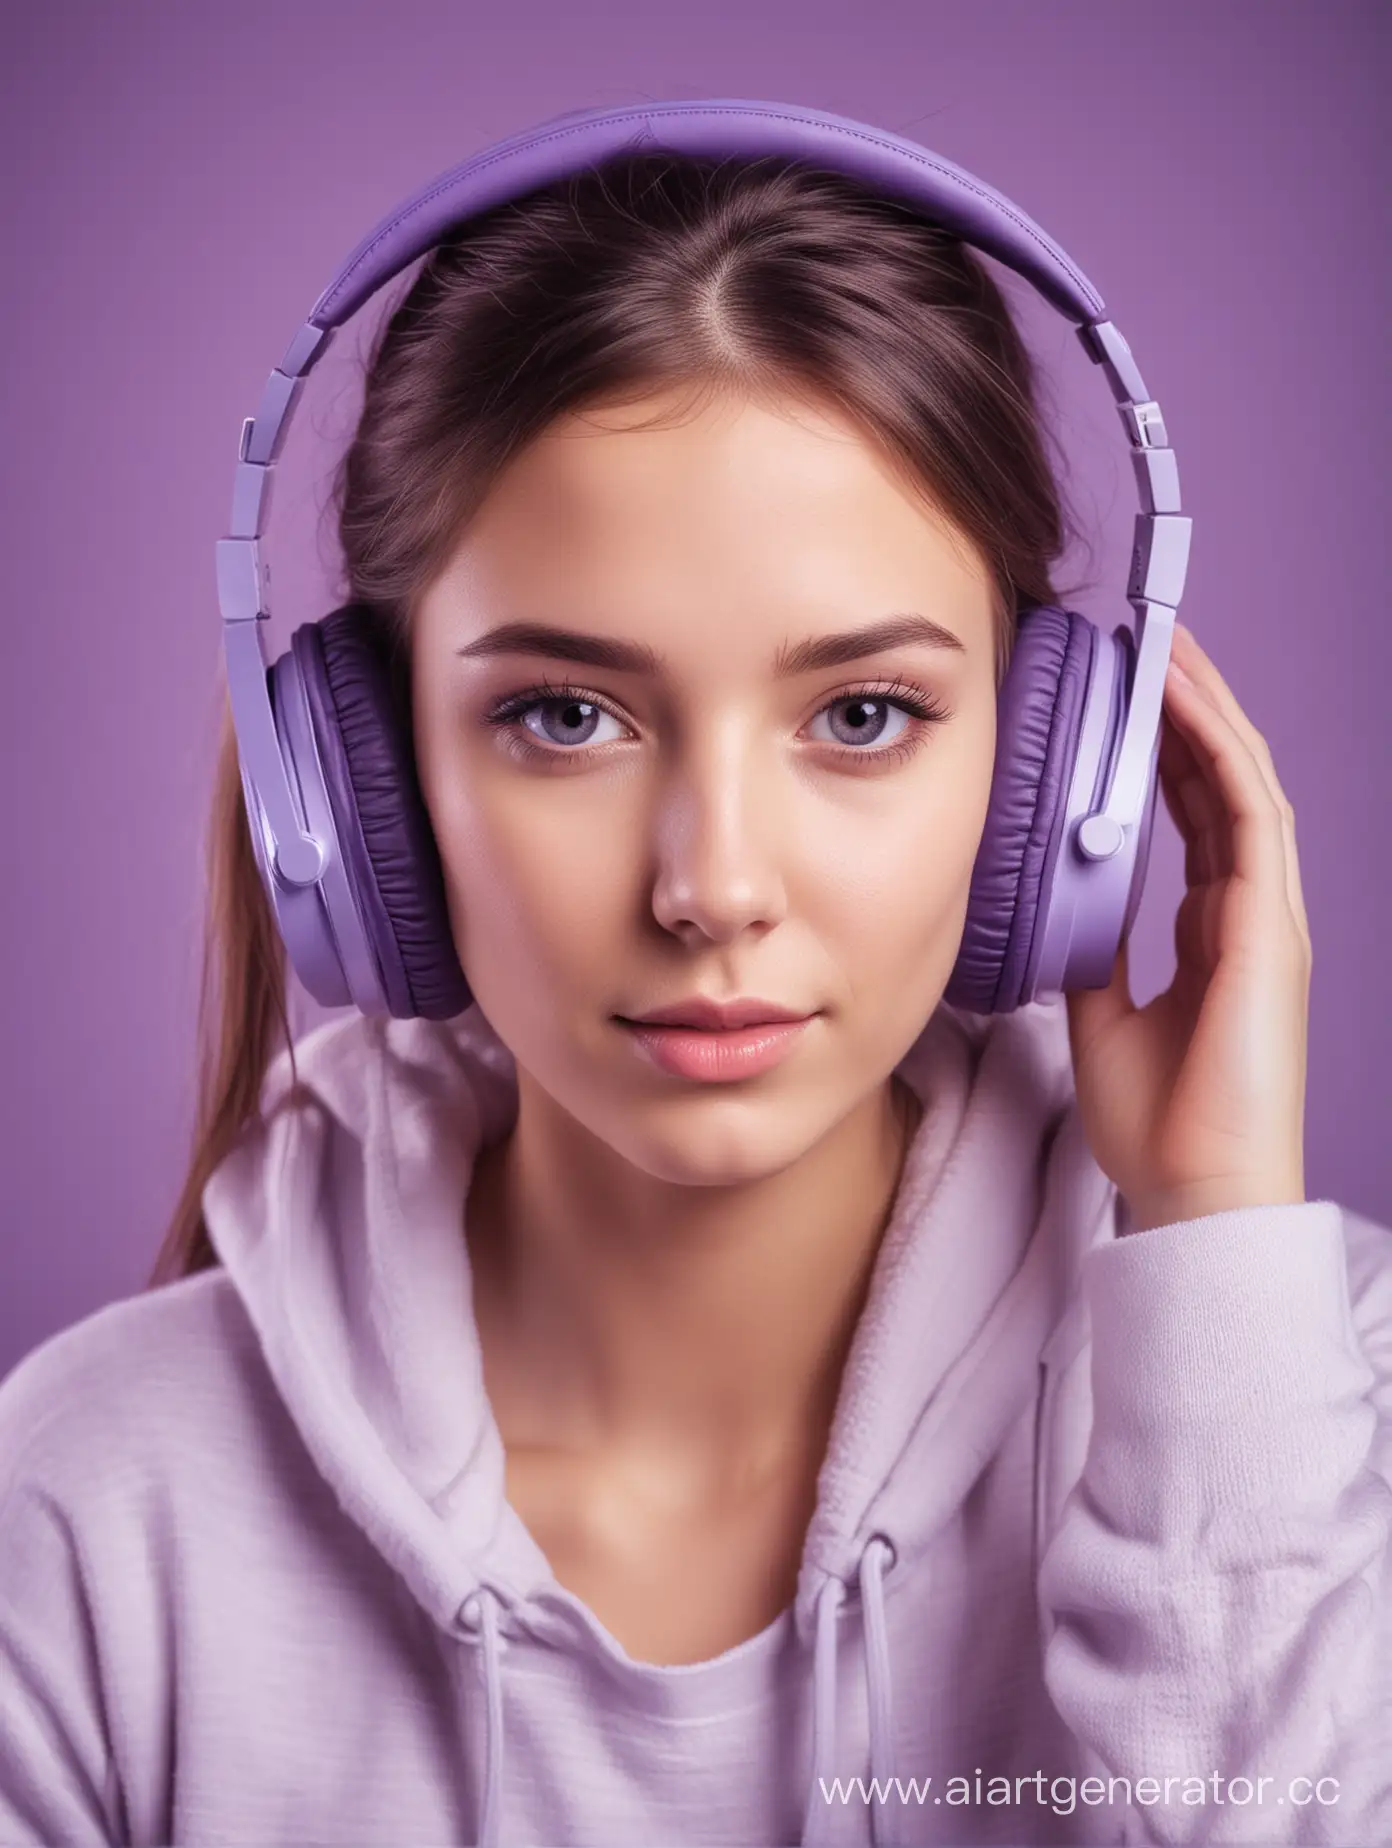 Girl-Enjoying-Music-with-Headphones-in-a-Light-and-PurpleTinted-Scene